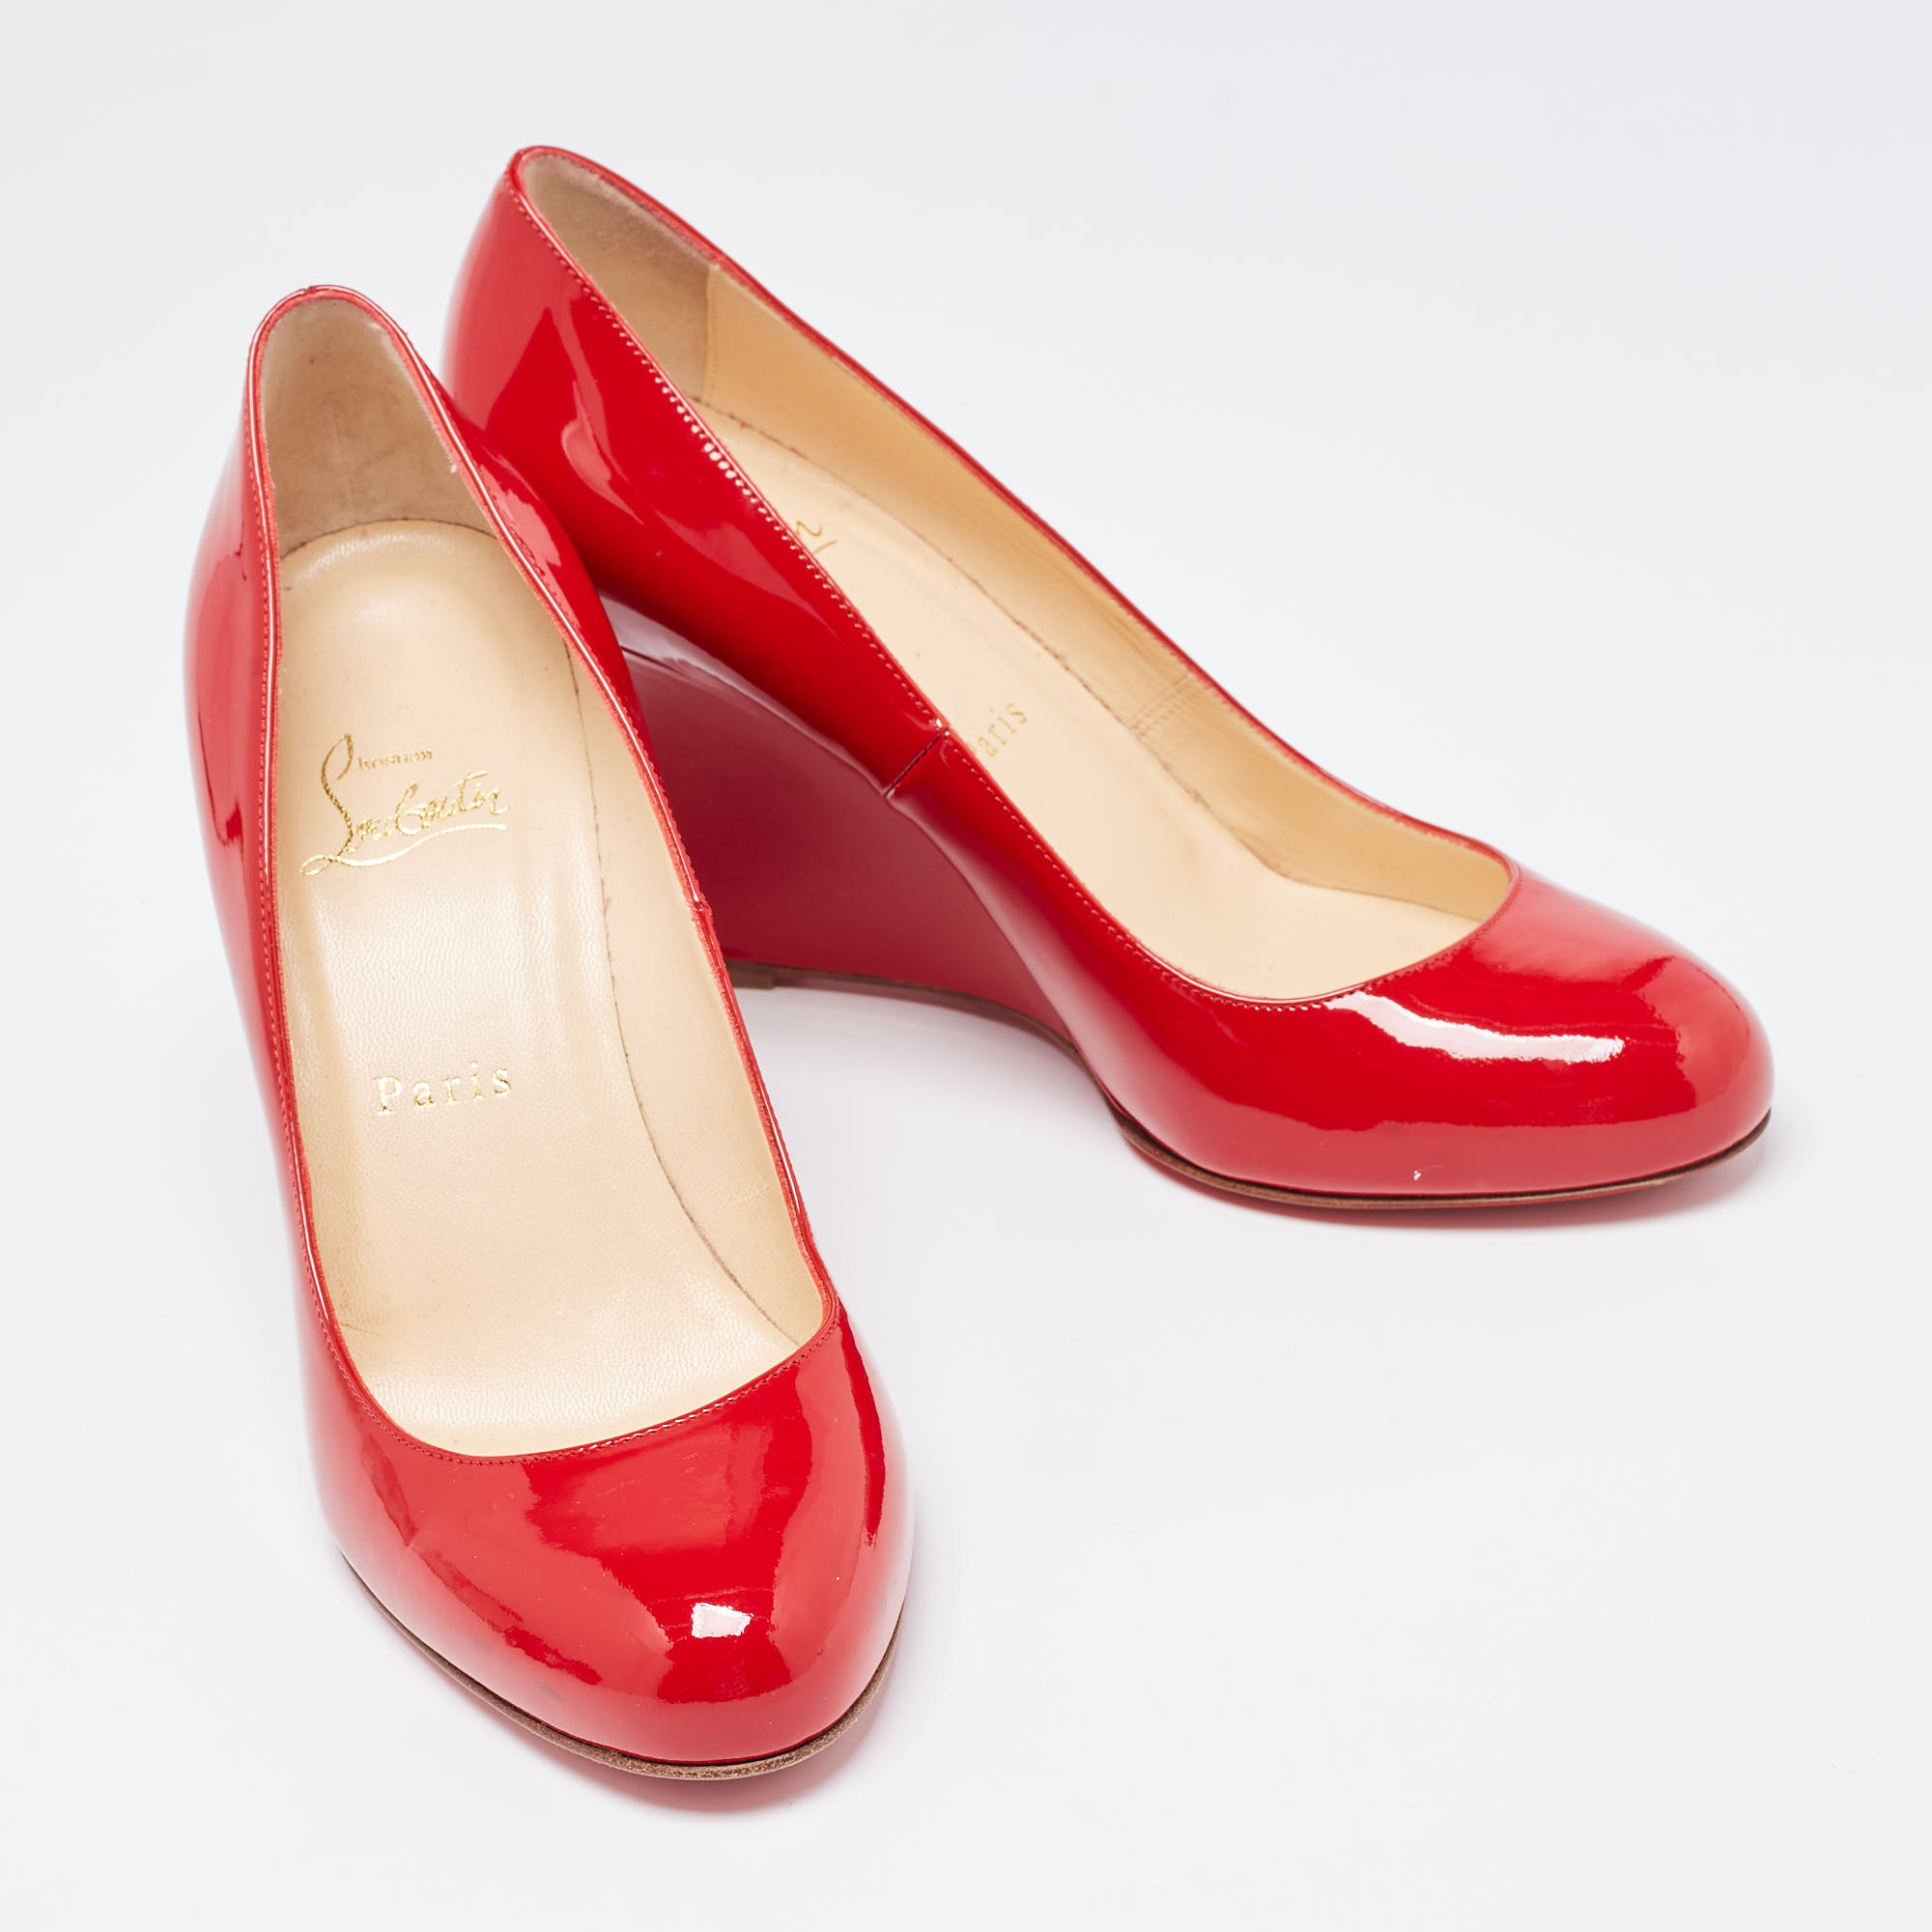 Christian Louboutin Red Patent Leather Ron Ron Wedge Pumps Size 38.5